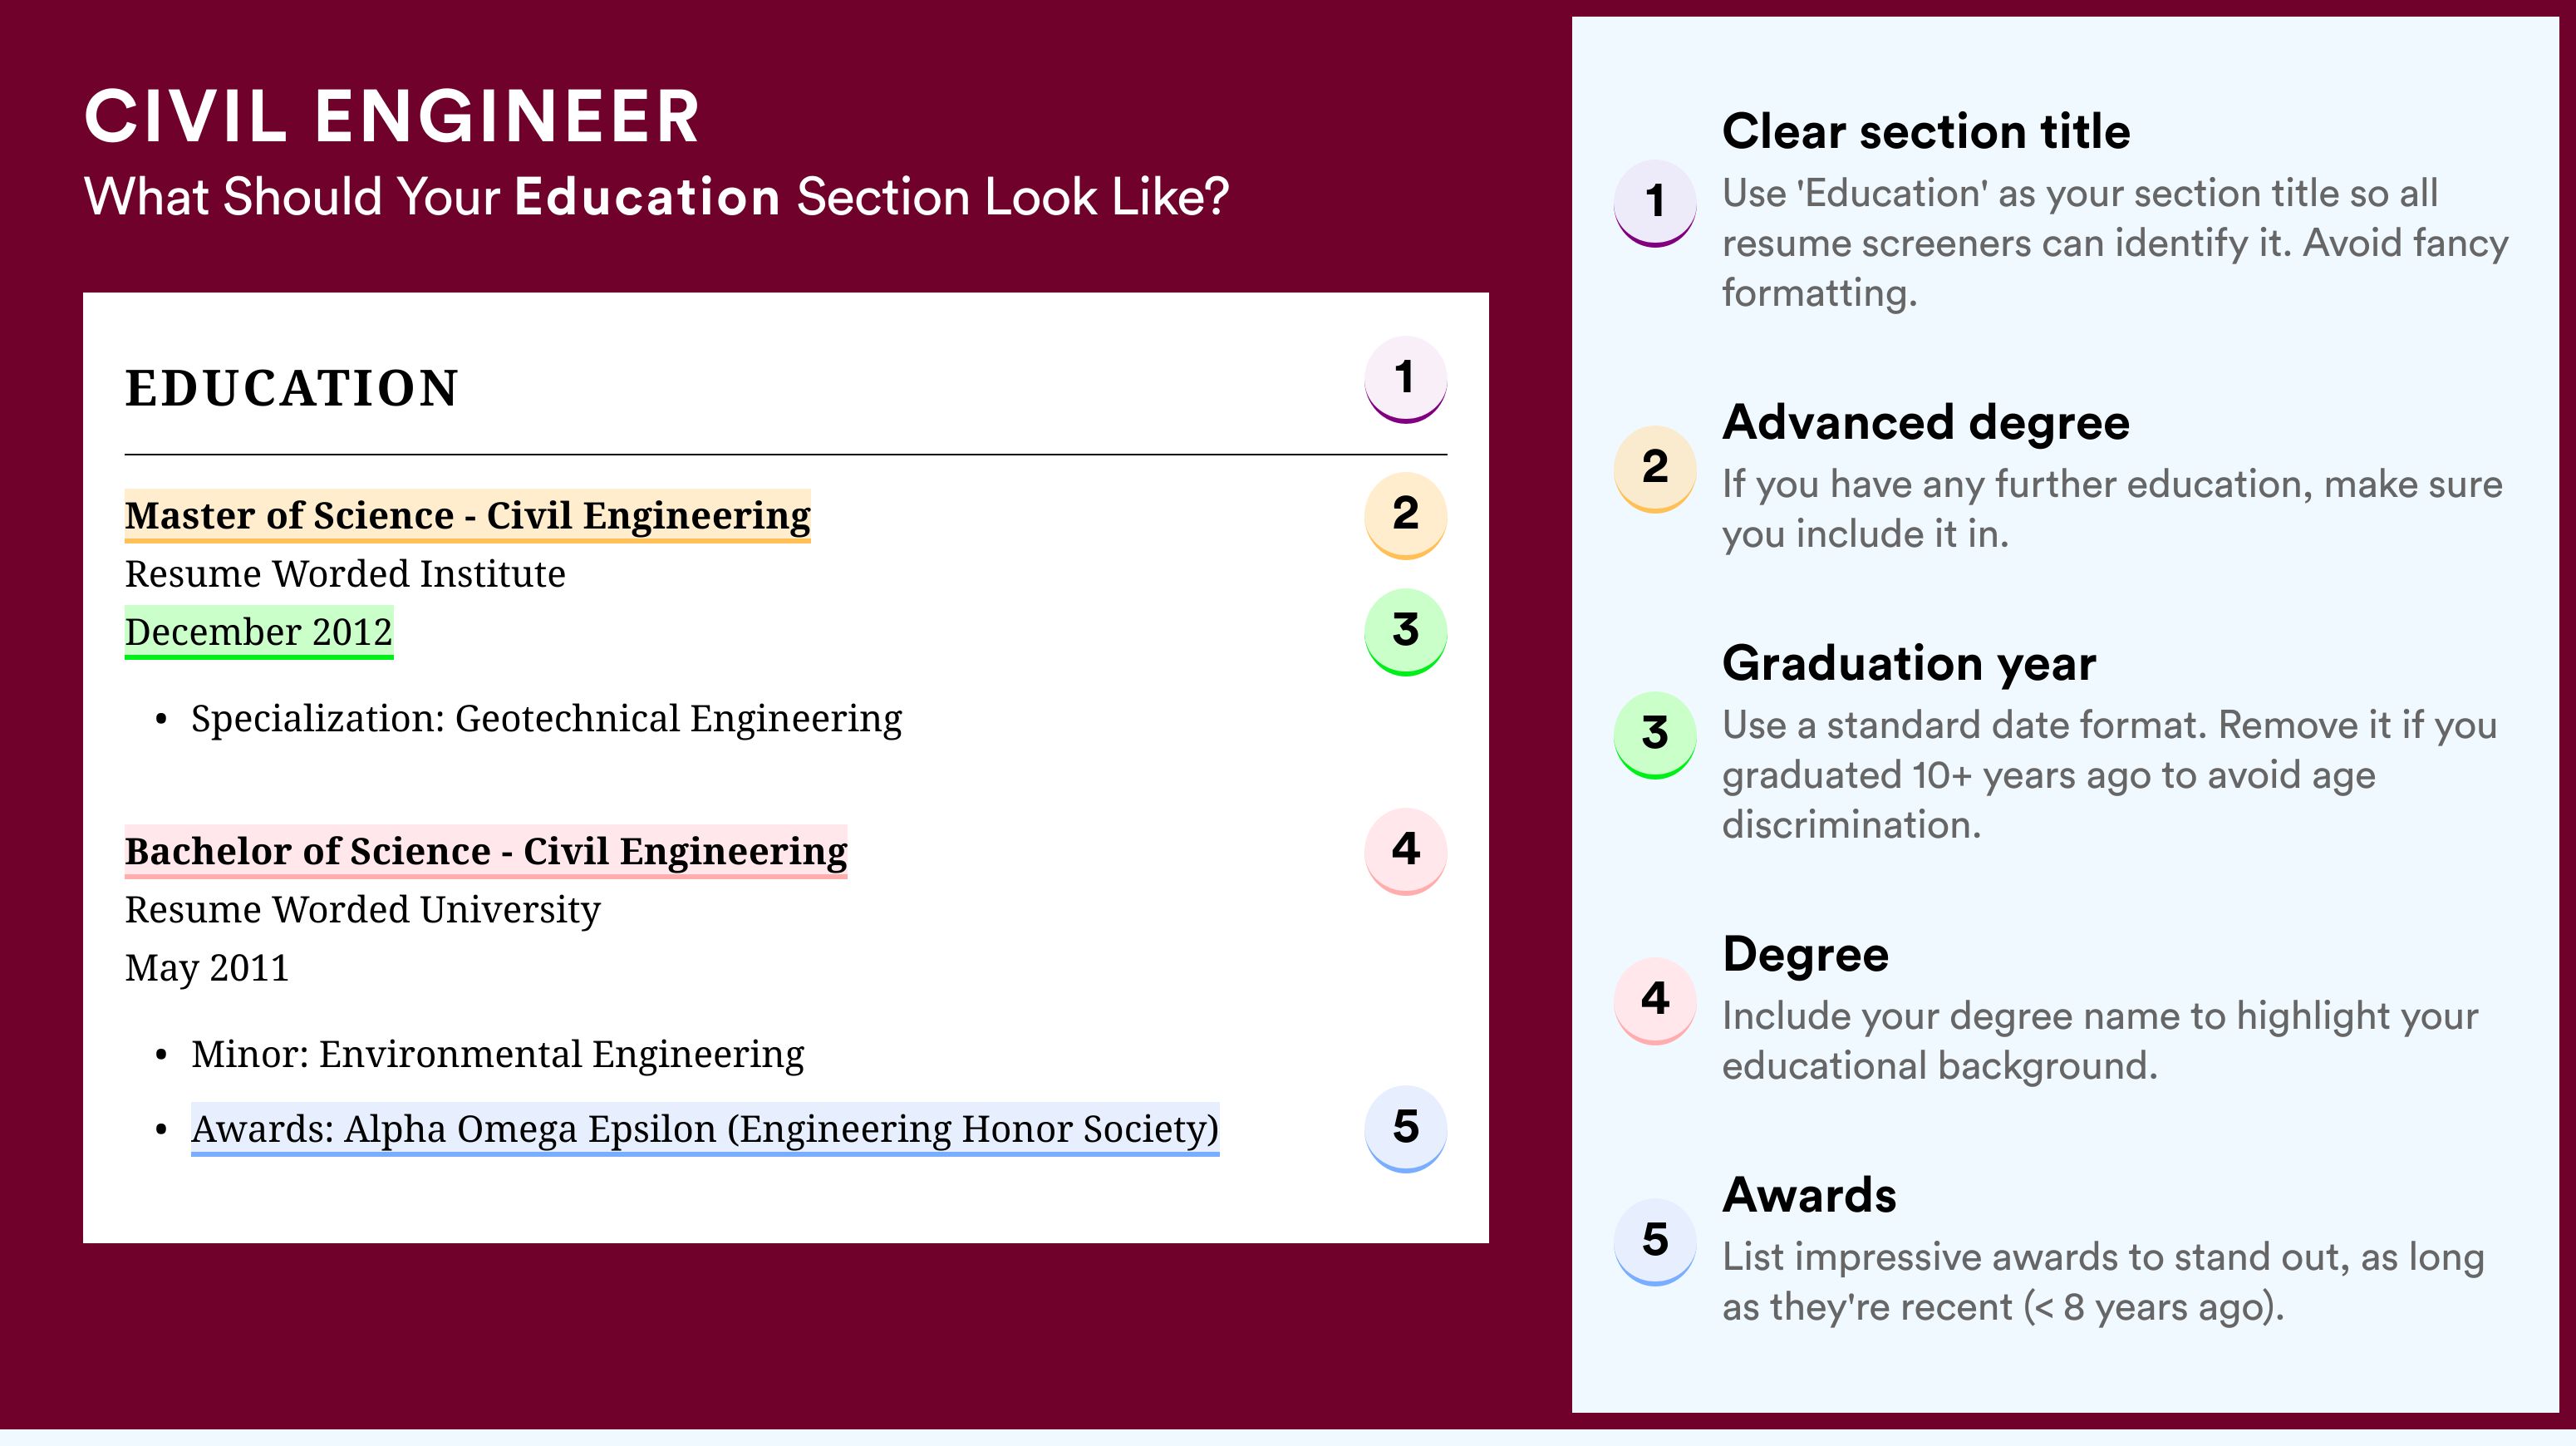 How To Write An Education Section - Civil Engineer Roles